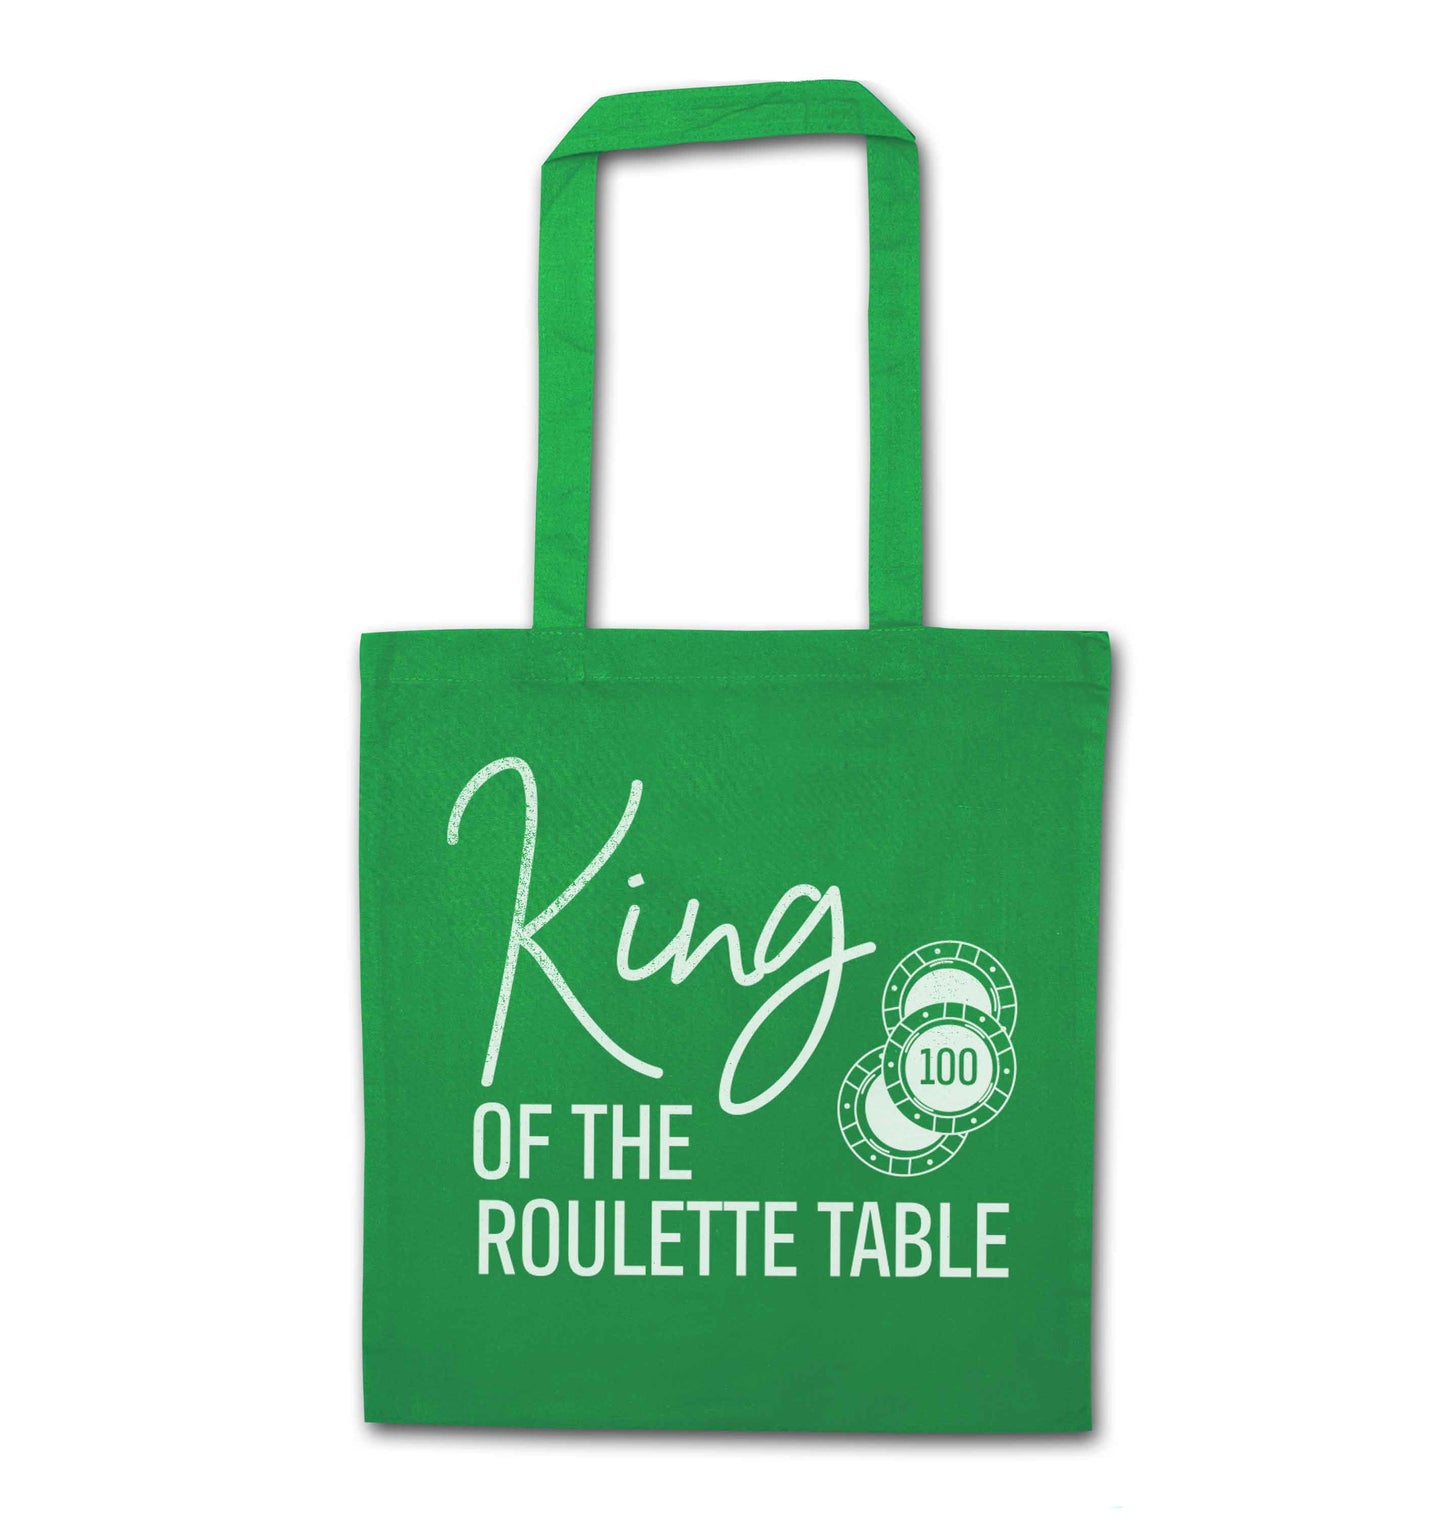 King of the roulette table green tote bag